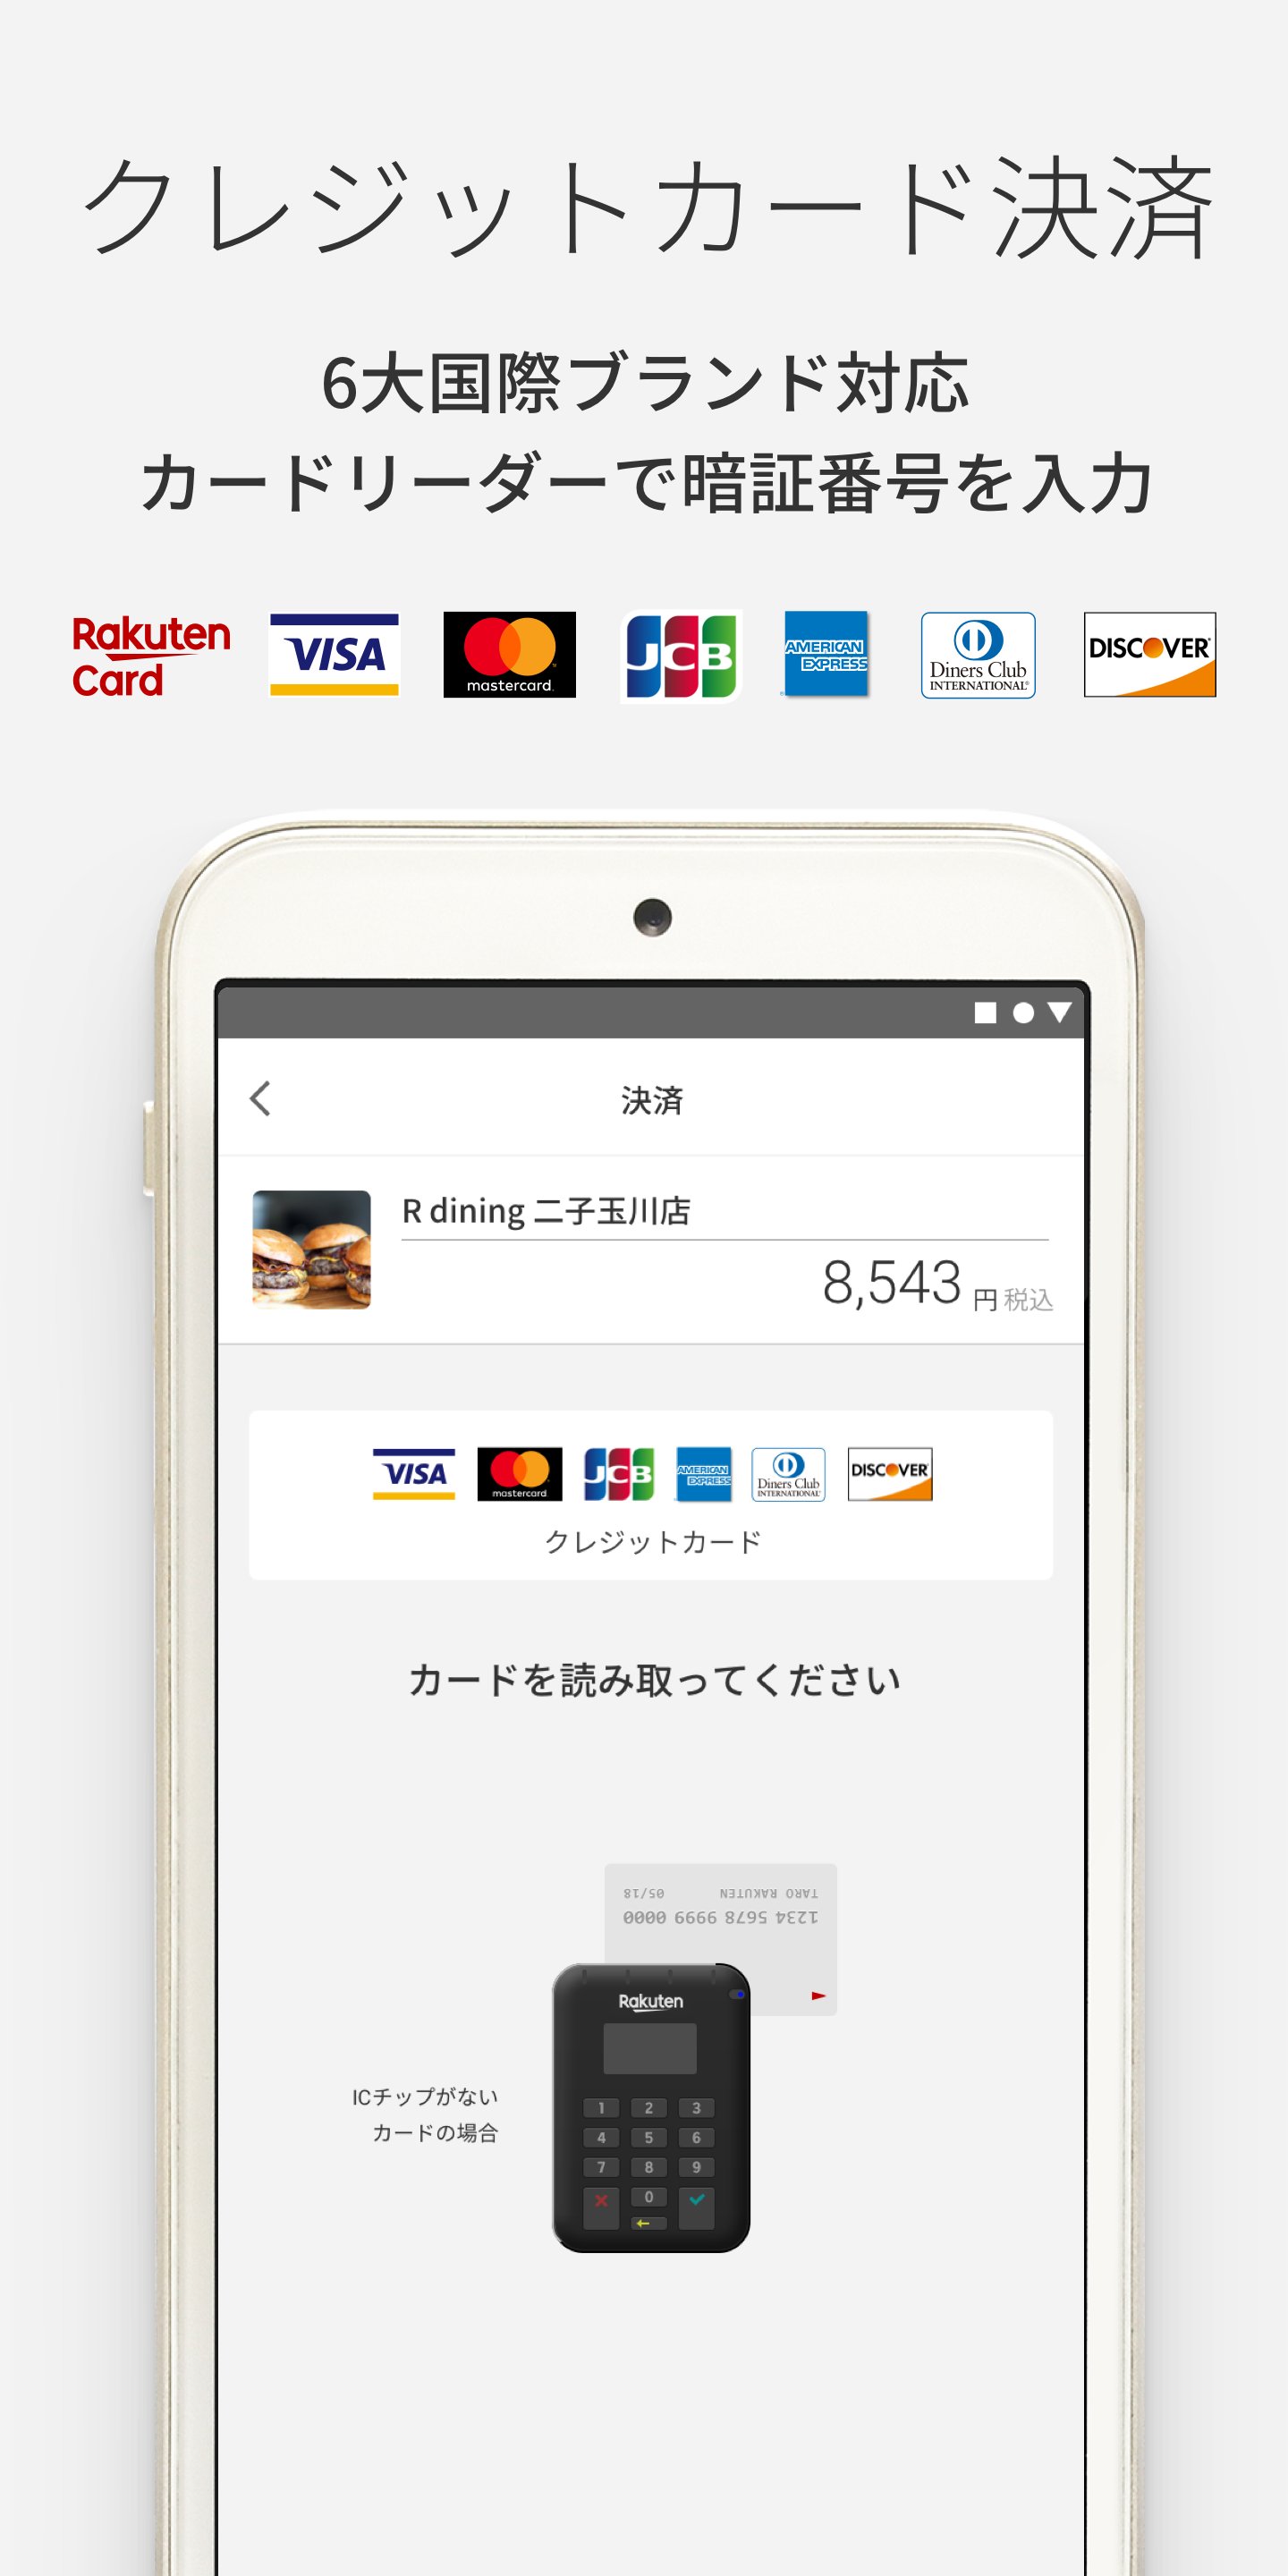 Android application 楽天ペイ店舗アプリ screenshort